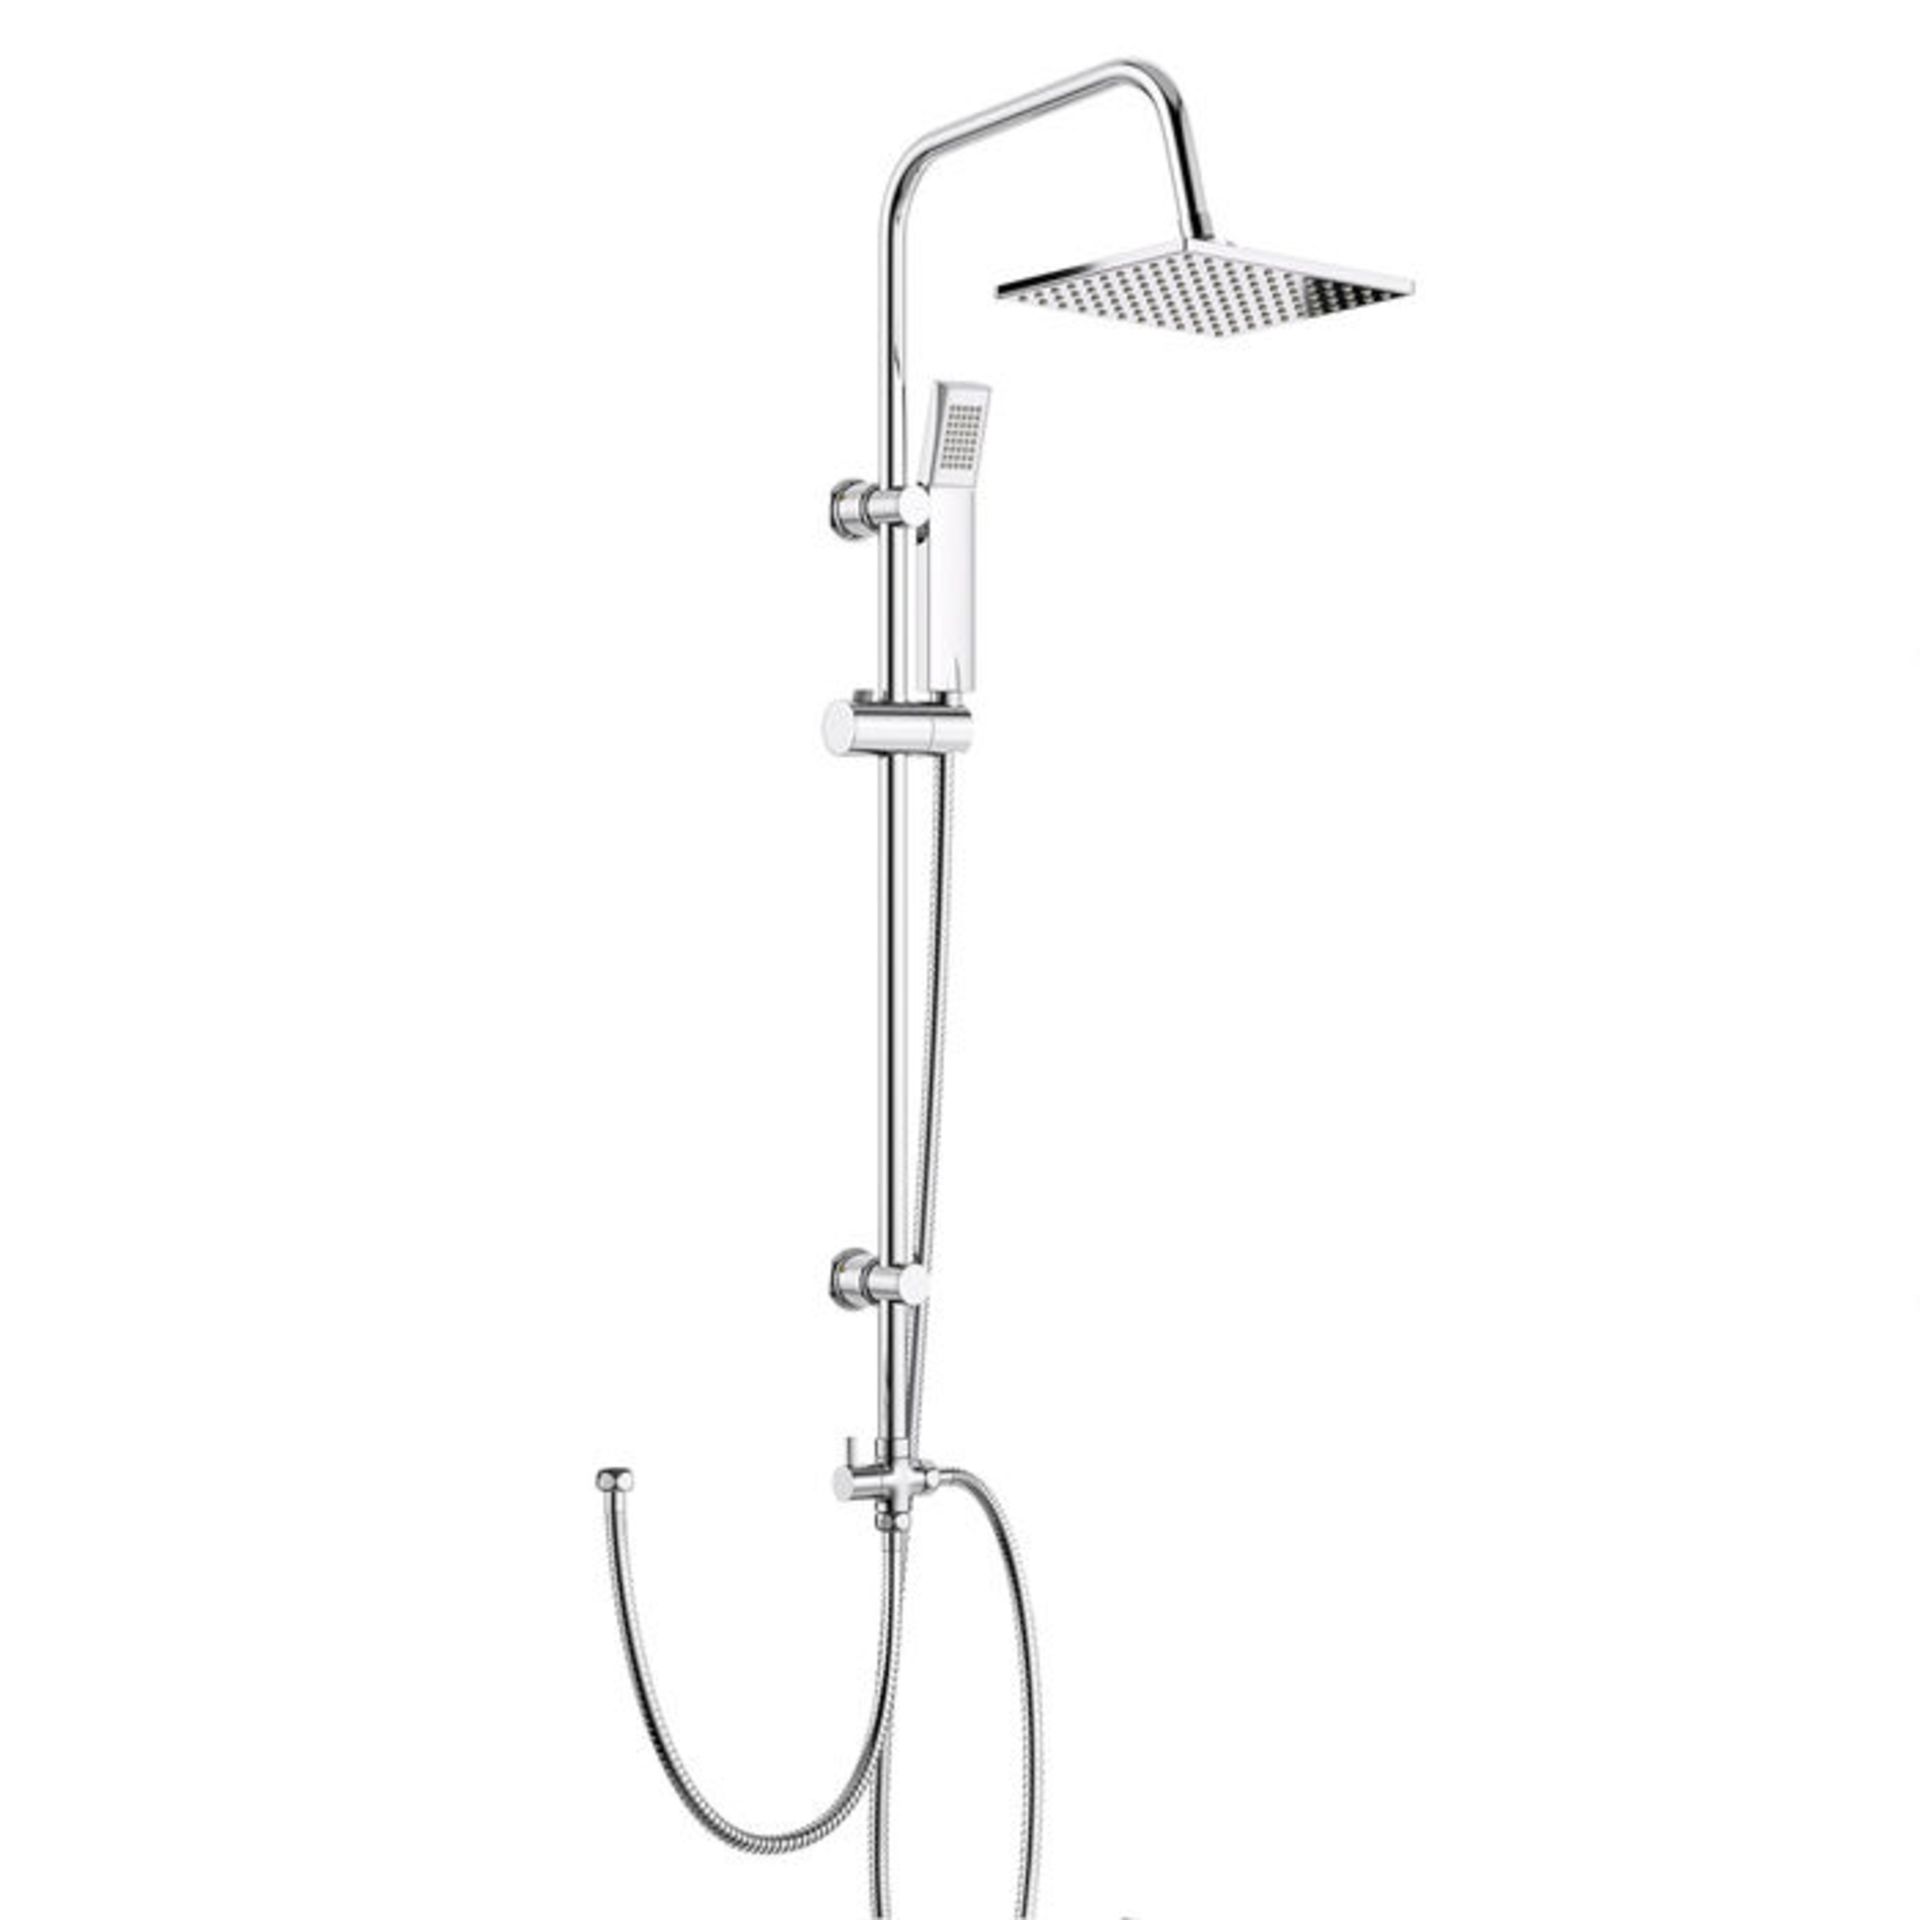 (AH100) 200mm Square Head, Riser Rail & Handheld Kit. Quality stainless steel shower head with - Image 2 of 2